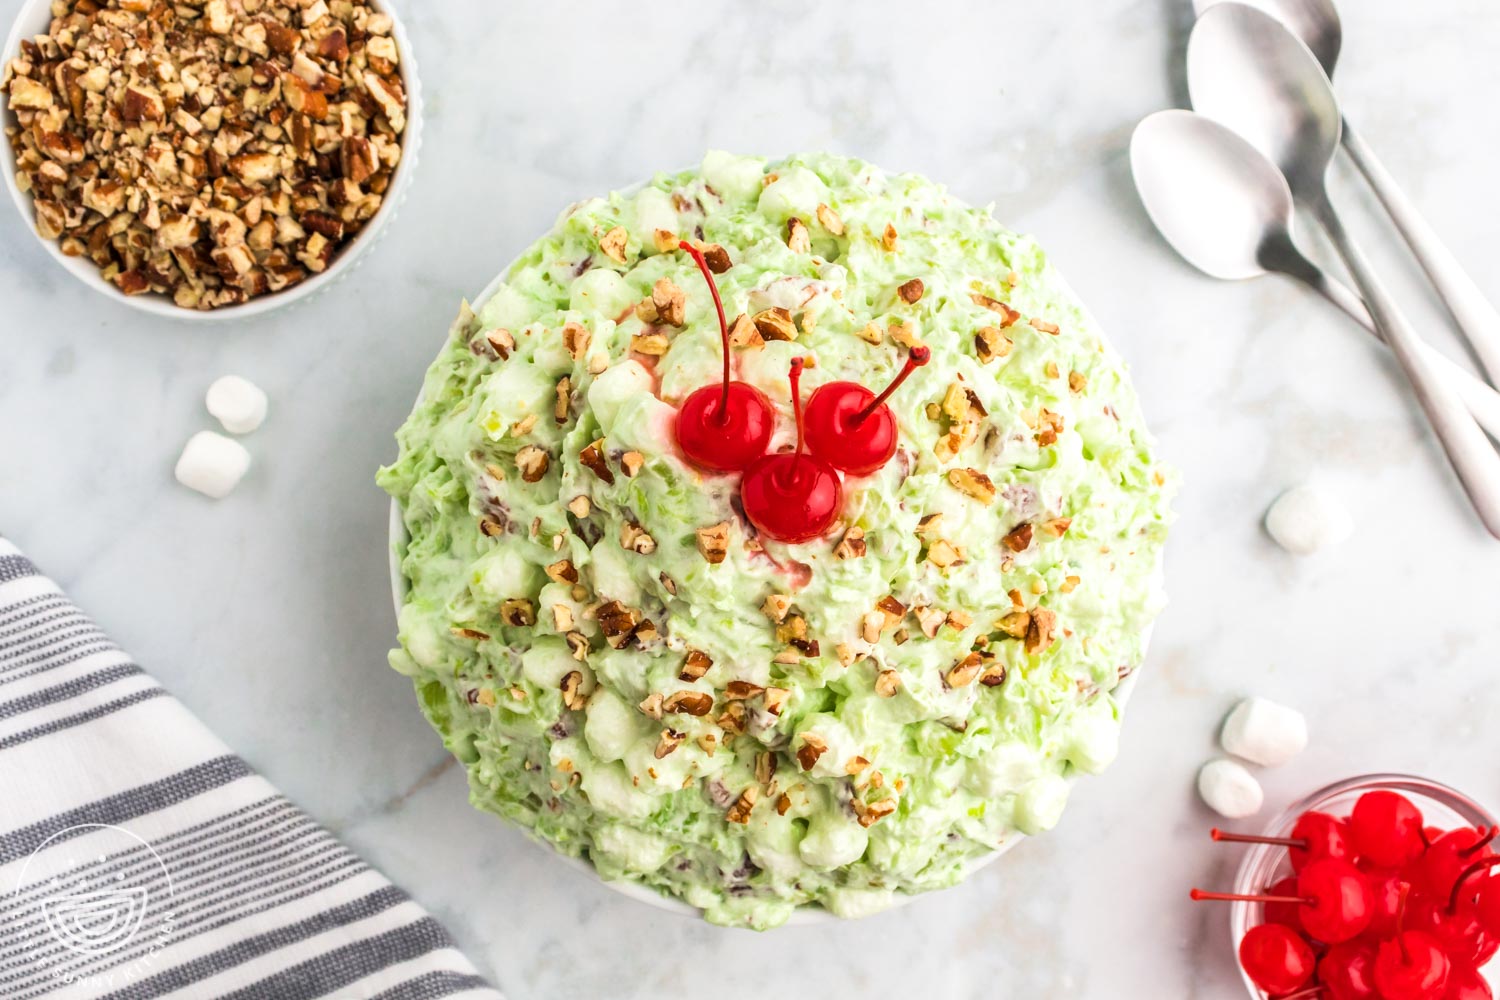 Horizontal image of an overhead shot of a pistachio dessert salad in a bowl, topped with maraschino cherries and pecan pieces. And a bowl of pecans on the side, and another bowl with maraschino cherries.